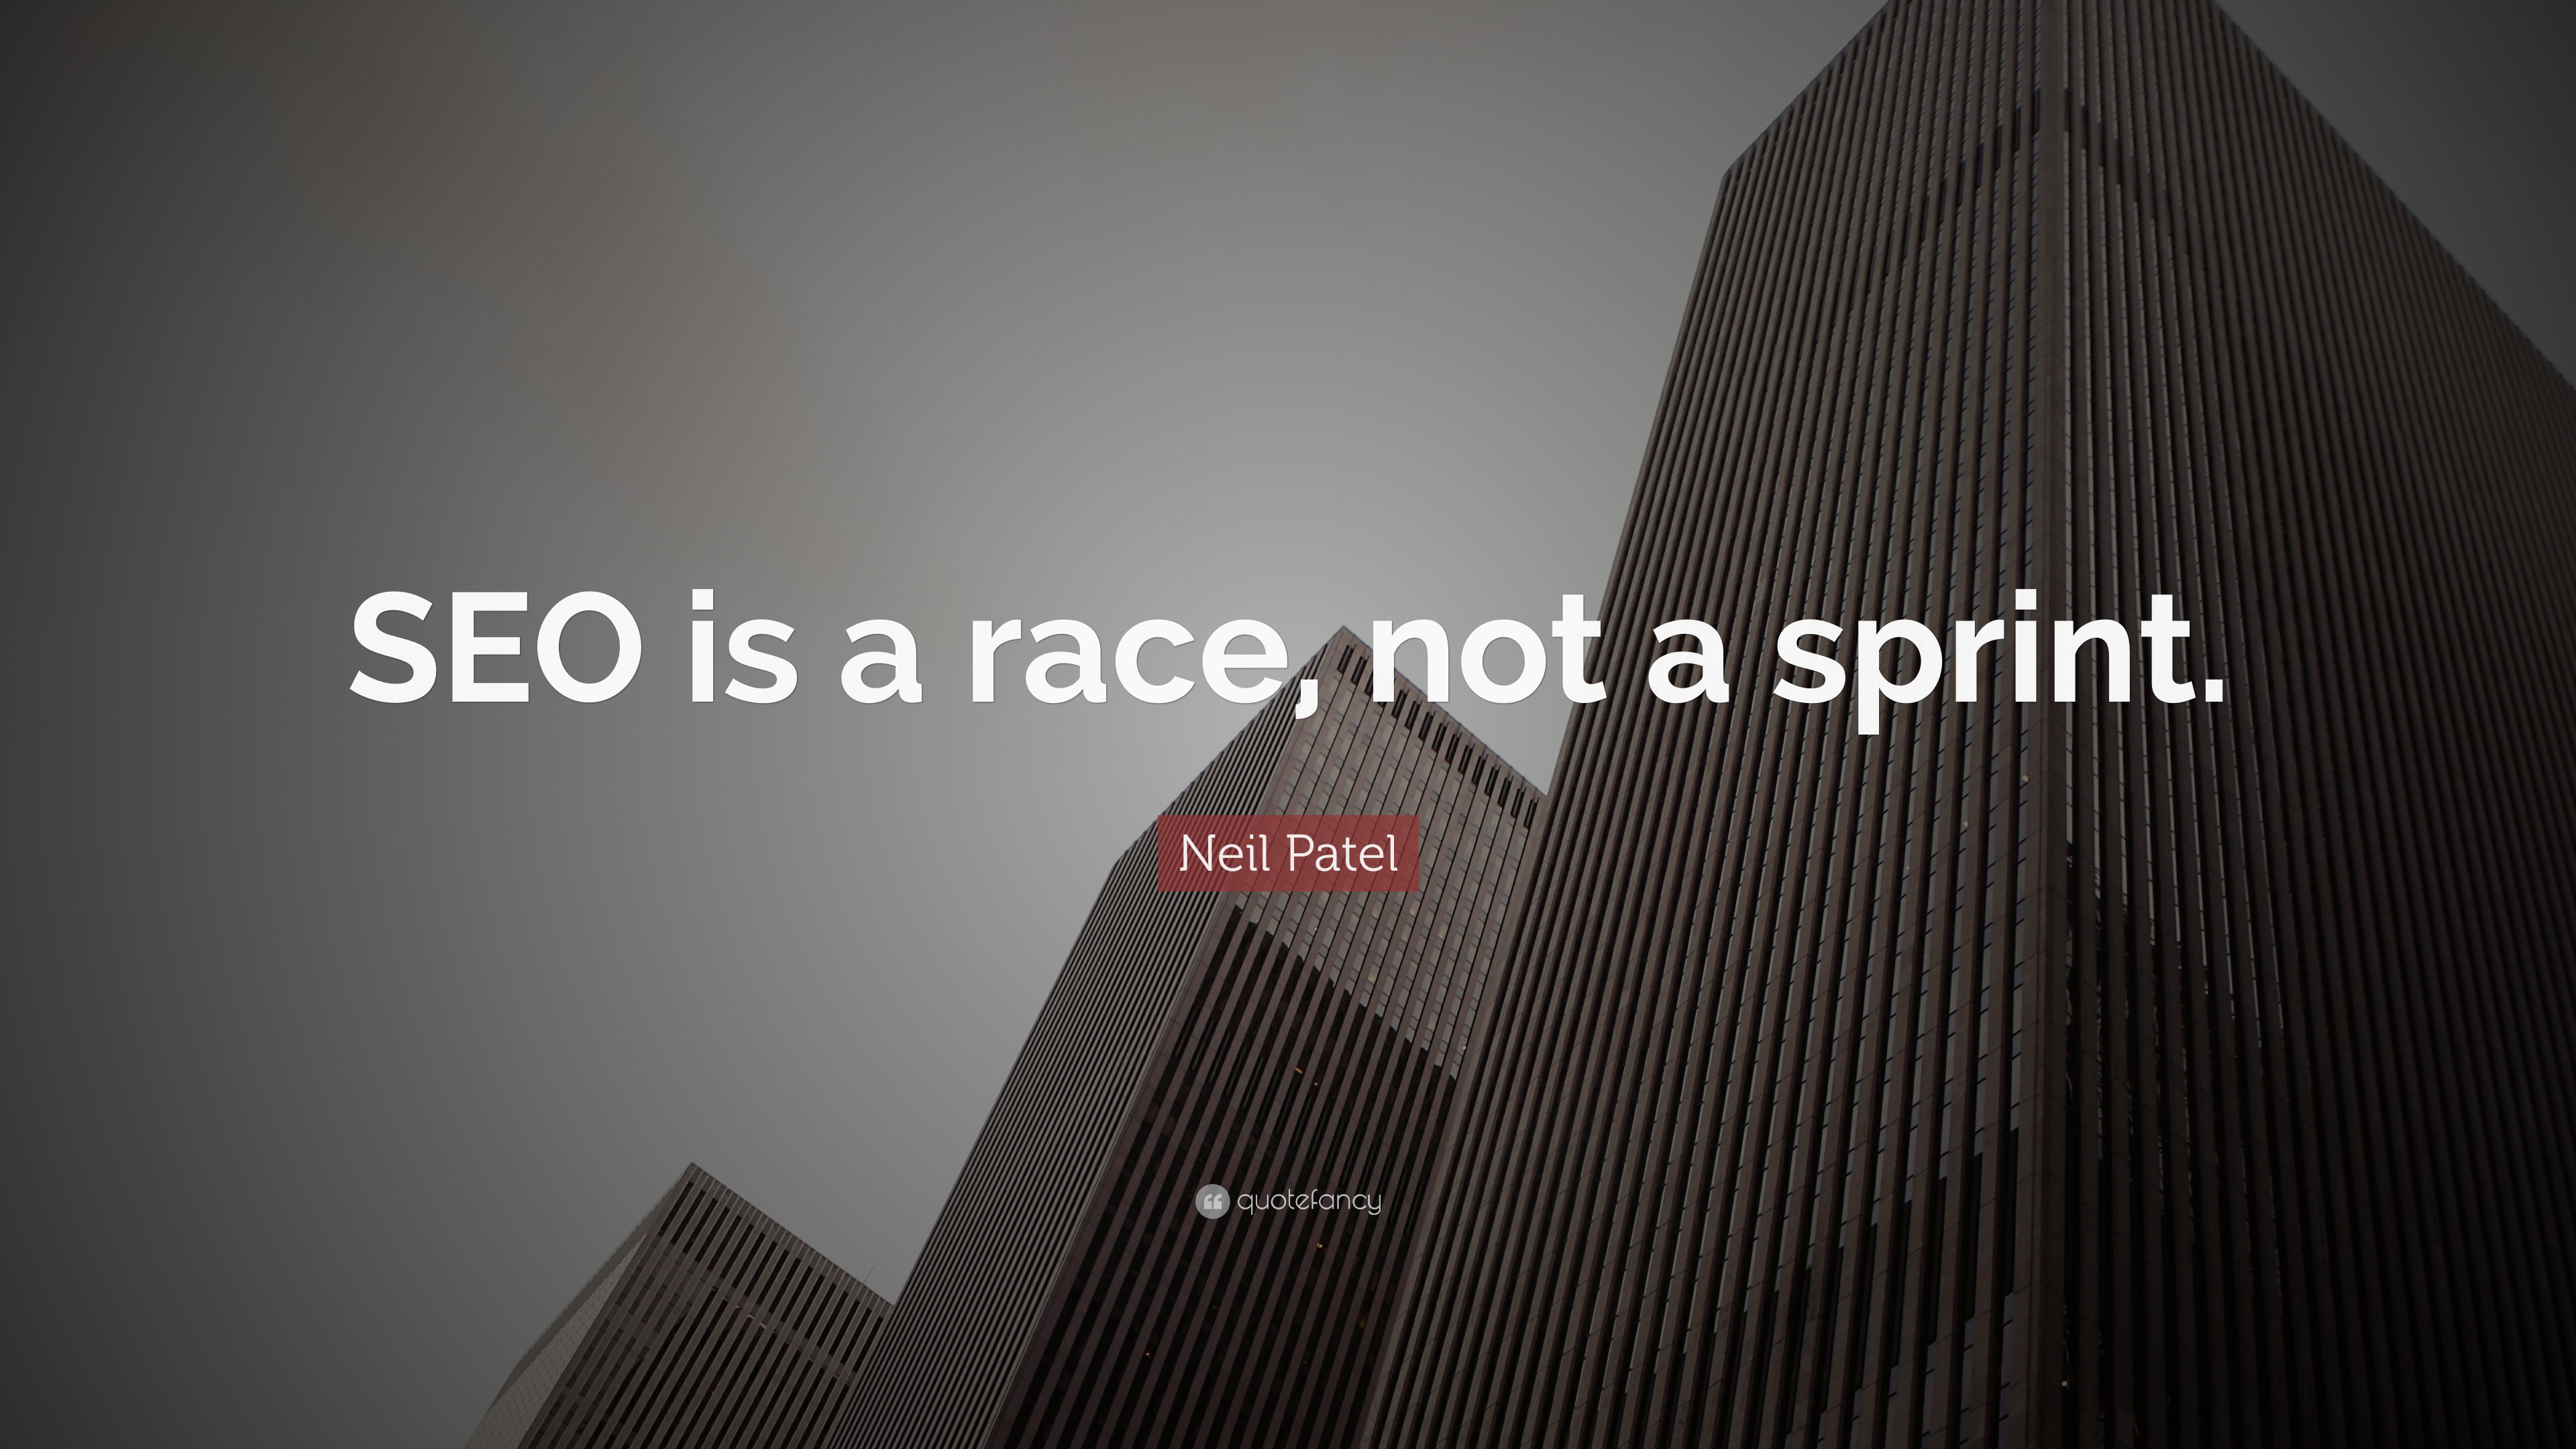 Neil Patel Quote: “SEO is a race, not a sprint.” 12 wallpaper